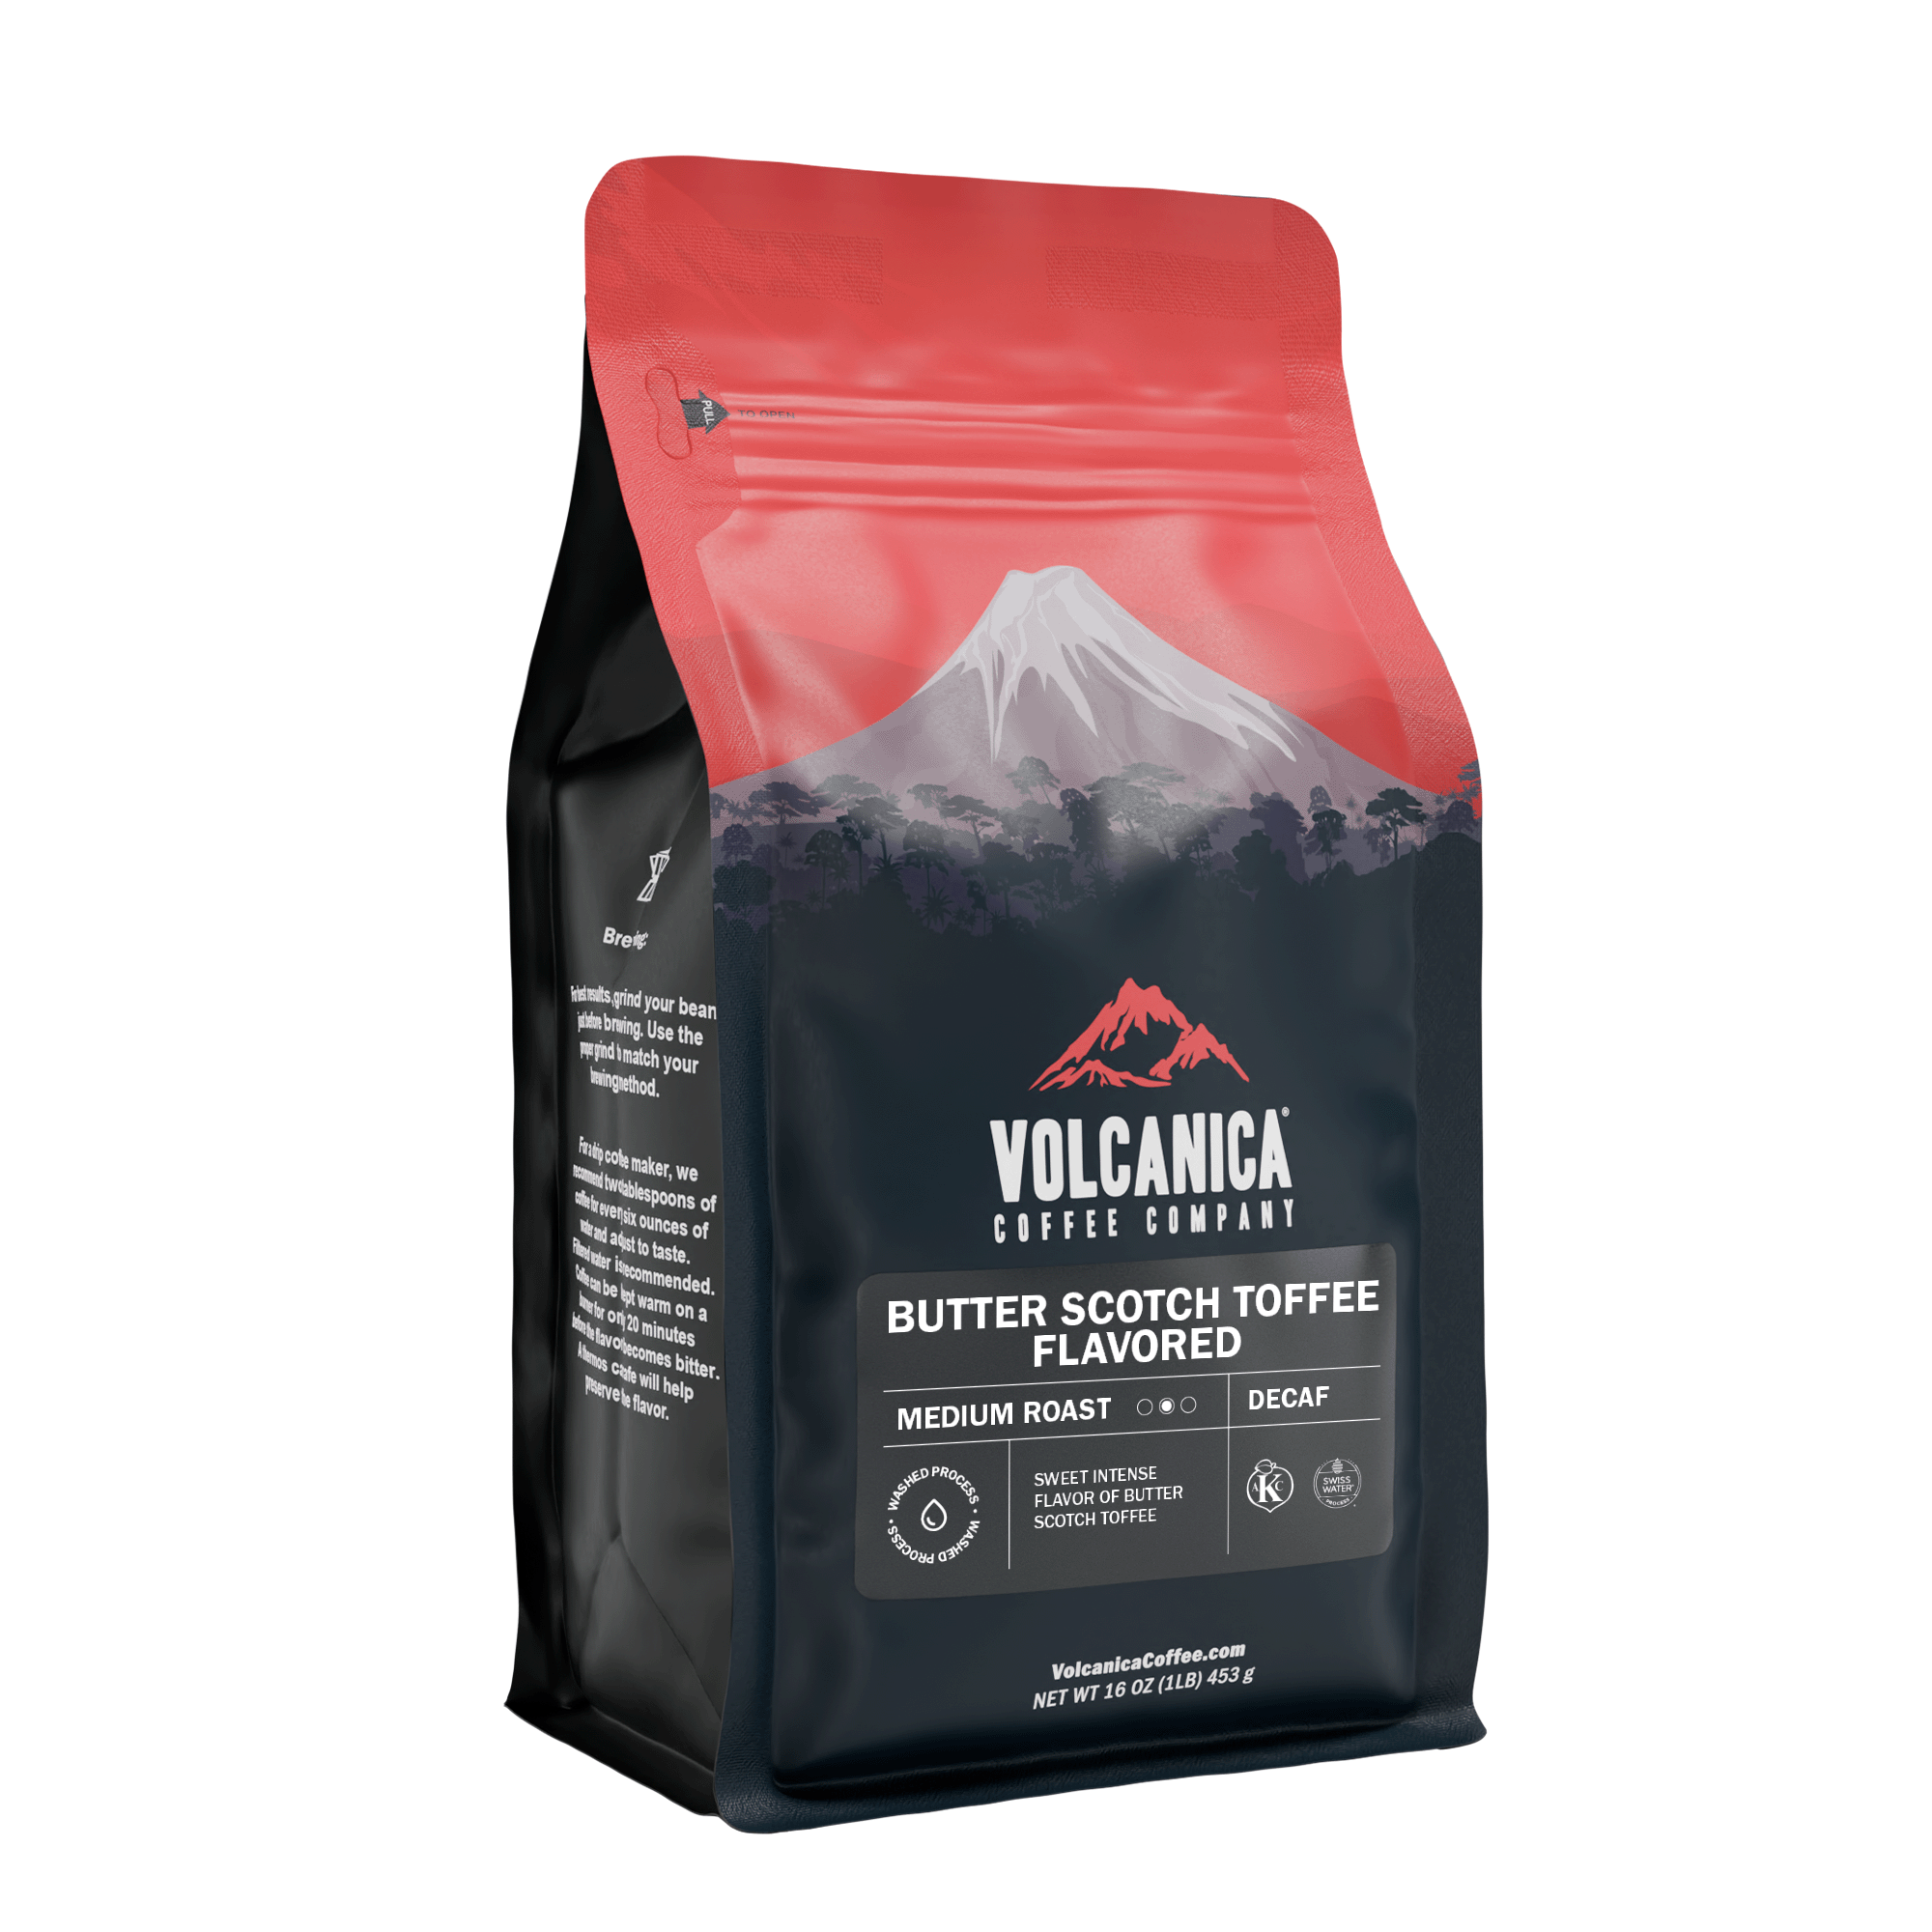 Volcanica Butterscotch Toffee Flavored Decaf Coffee